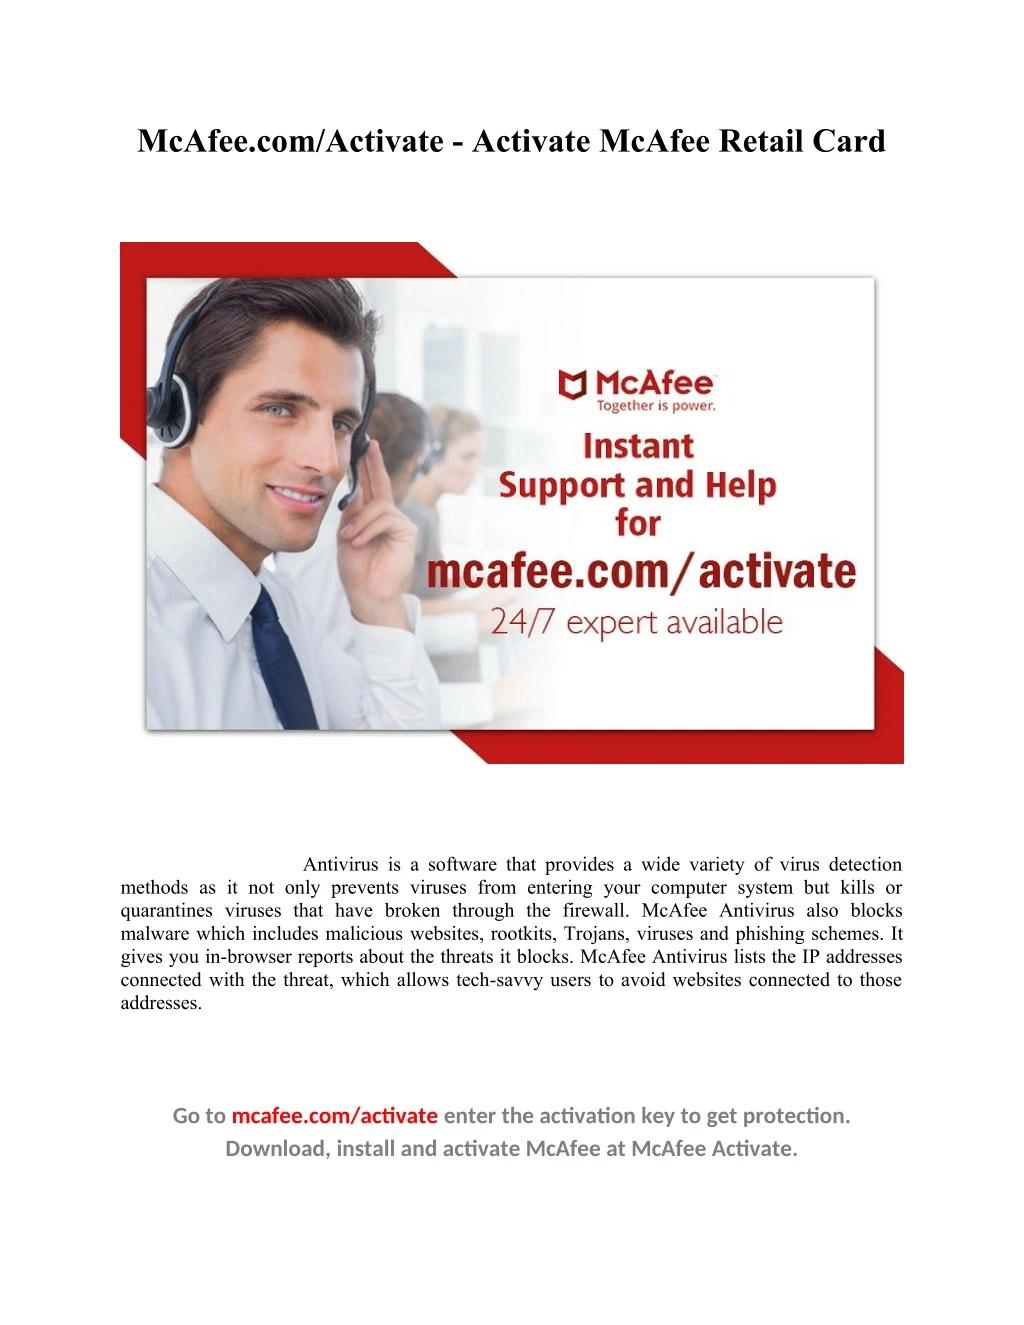 mcafee com activate activate mcafee retail card